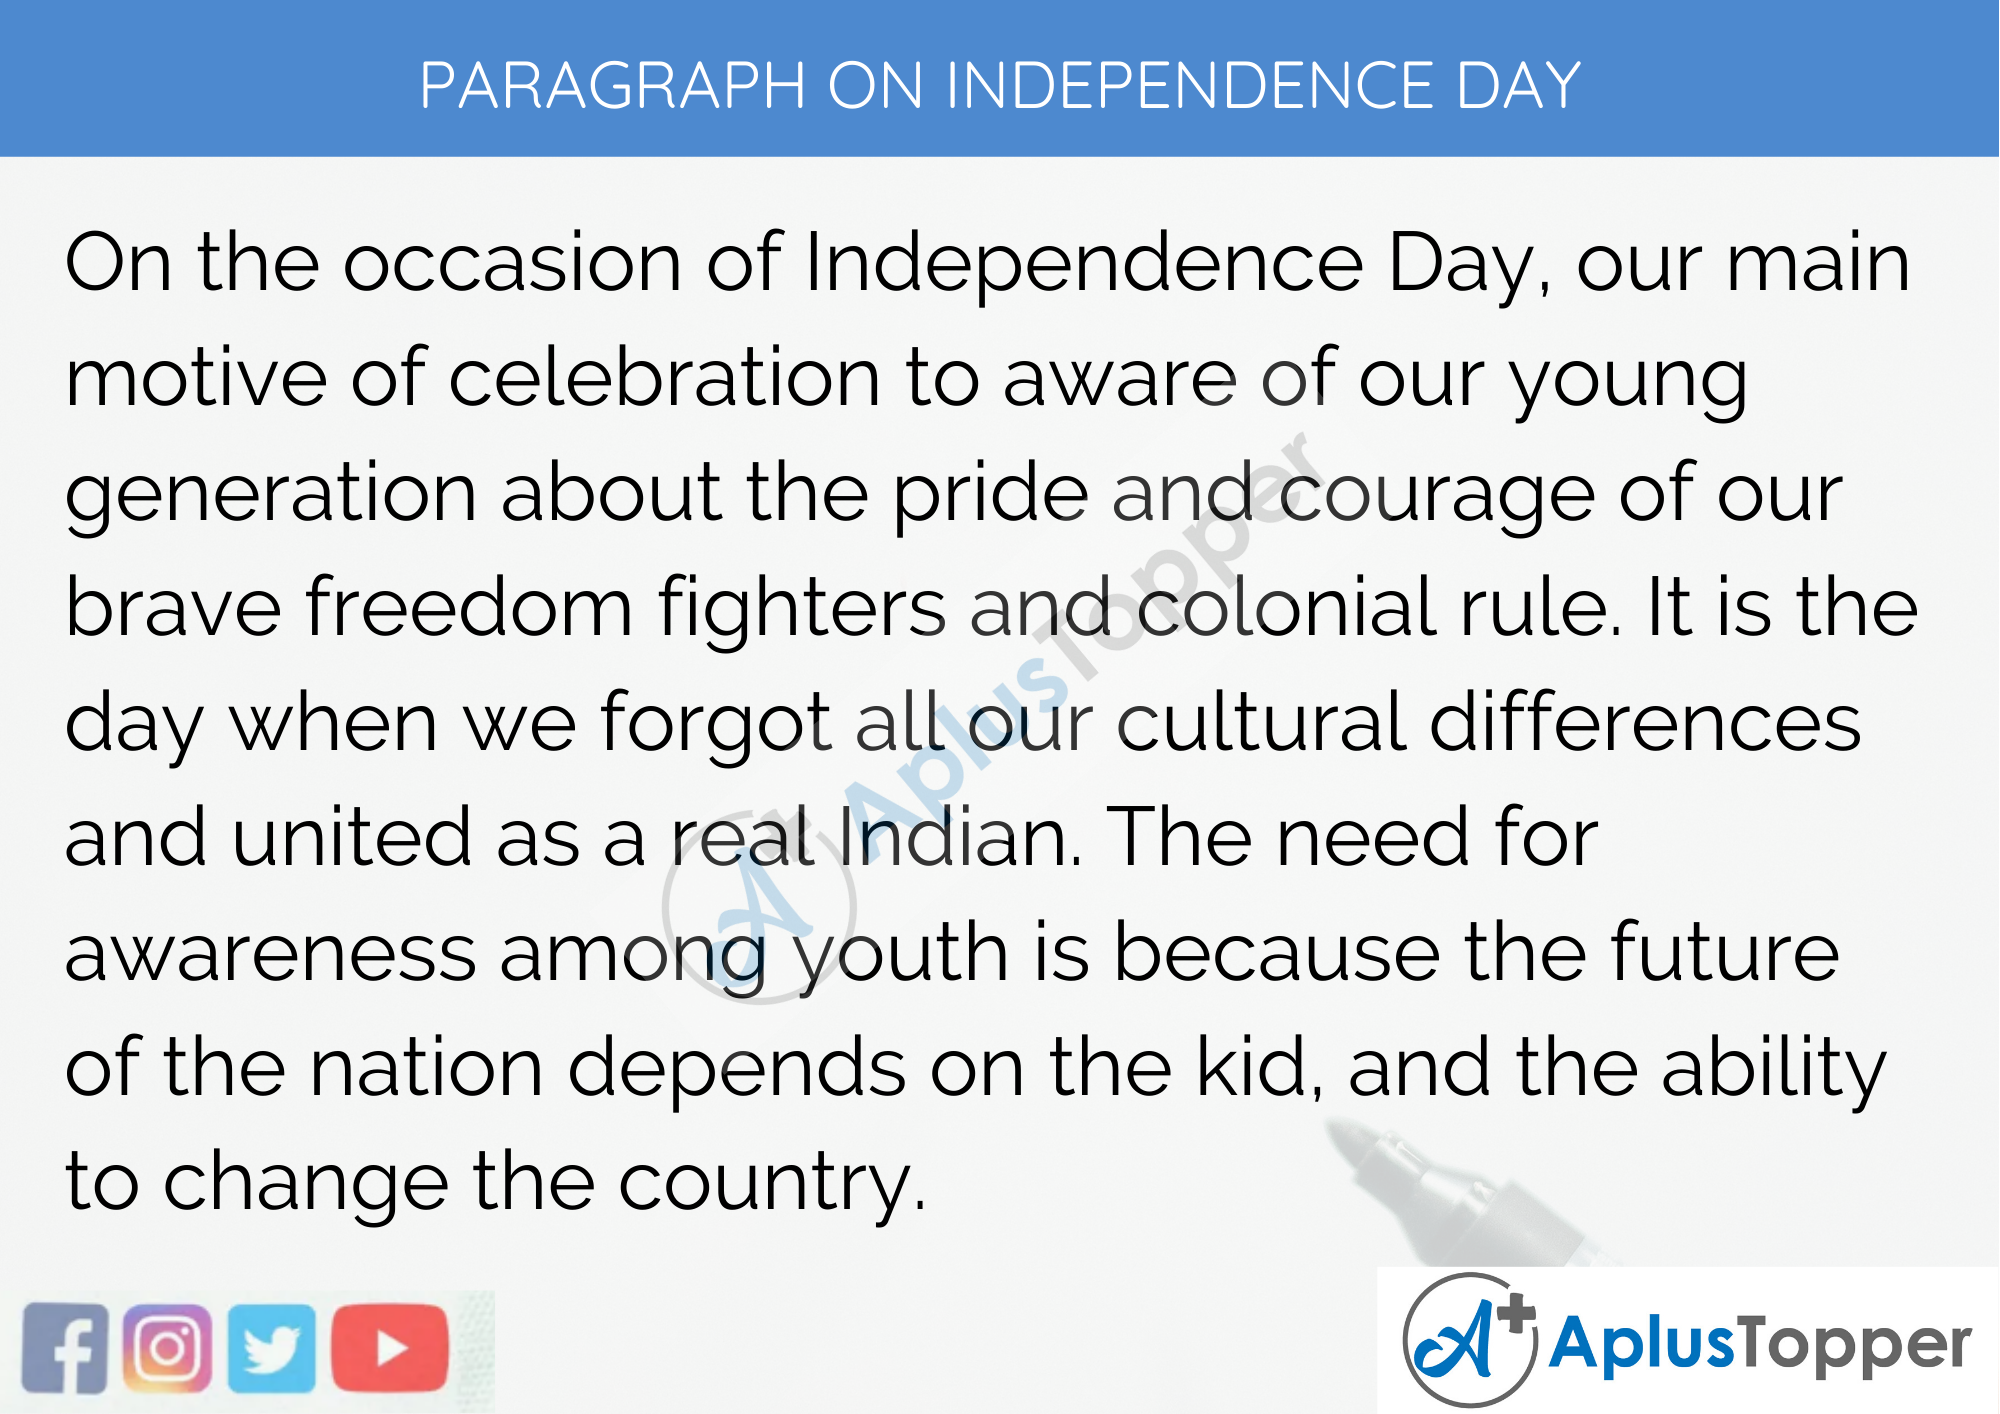 Paragraph on Independence Day - 250 to 300 Words for Classes 9, 10, 11,12 & Competitive Exam Students